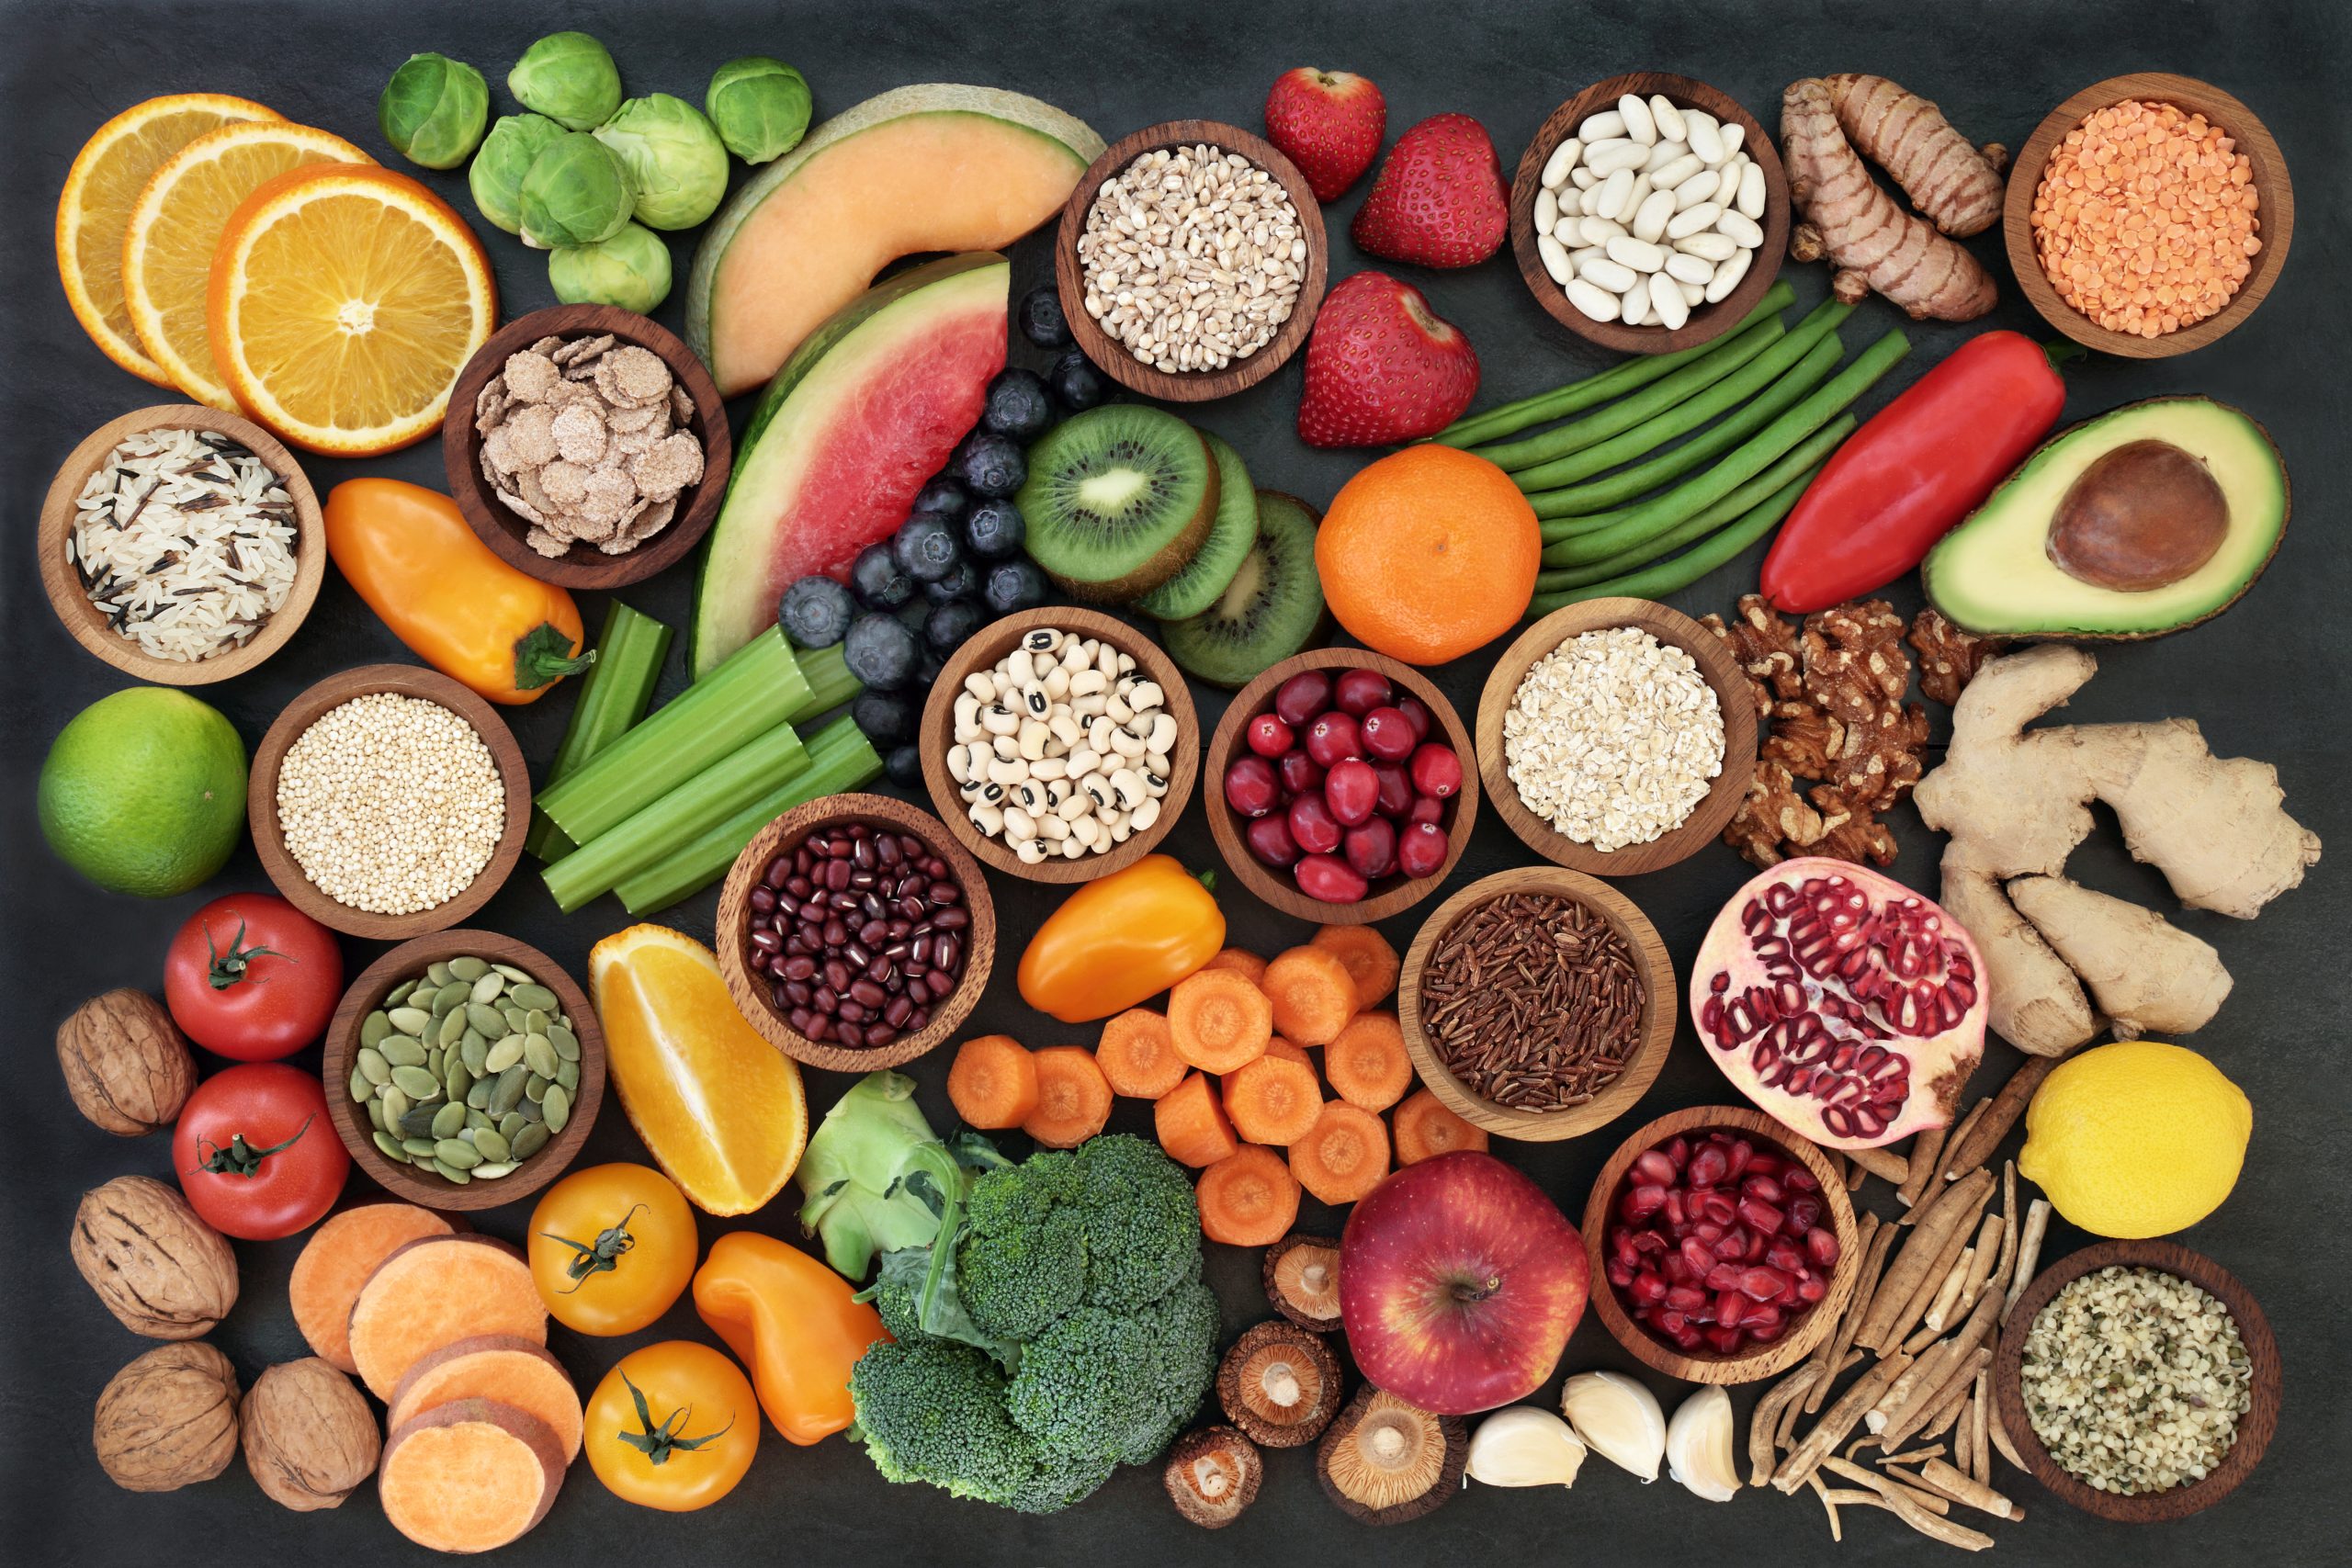 Vertical explainer photo 1 - A spread of fruit, vegetables, seeds, pulses, grains, cereals, herbs & spices.